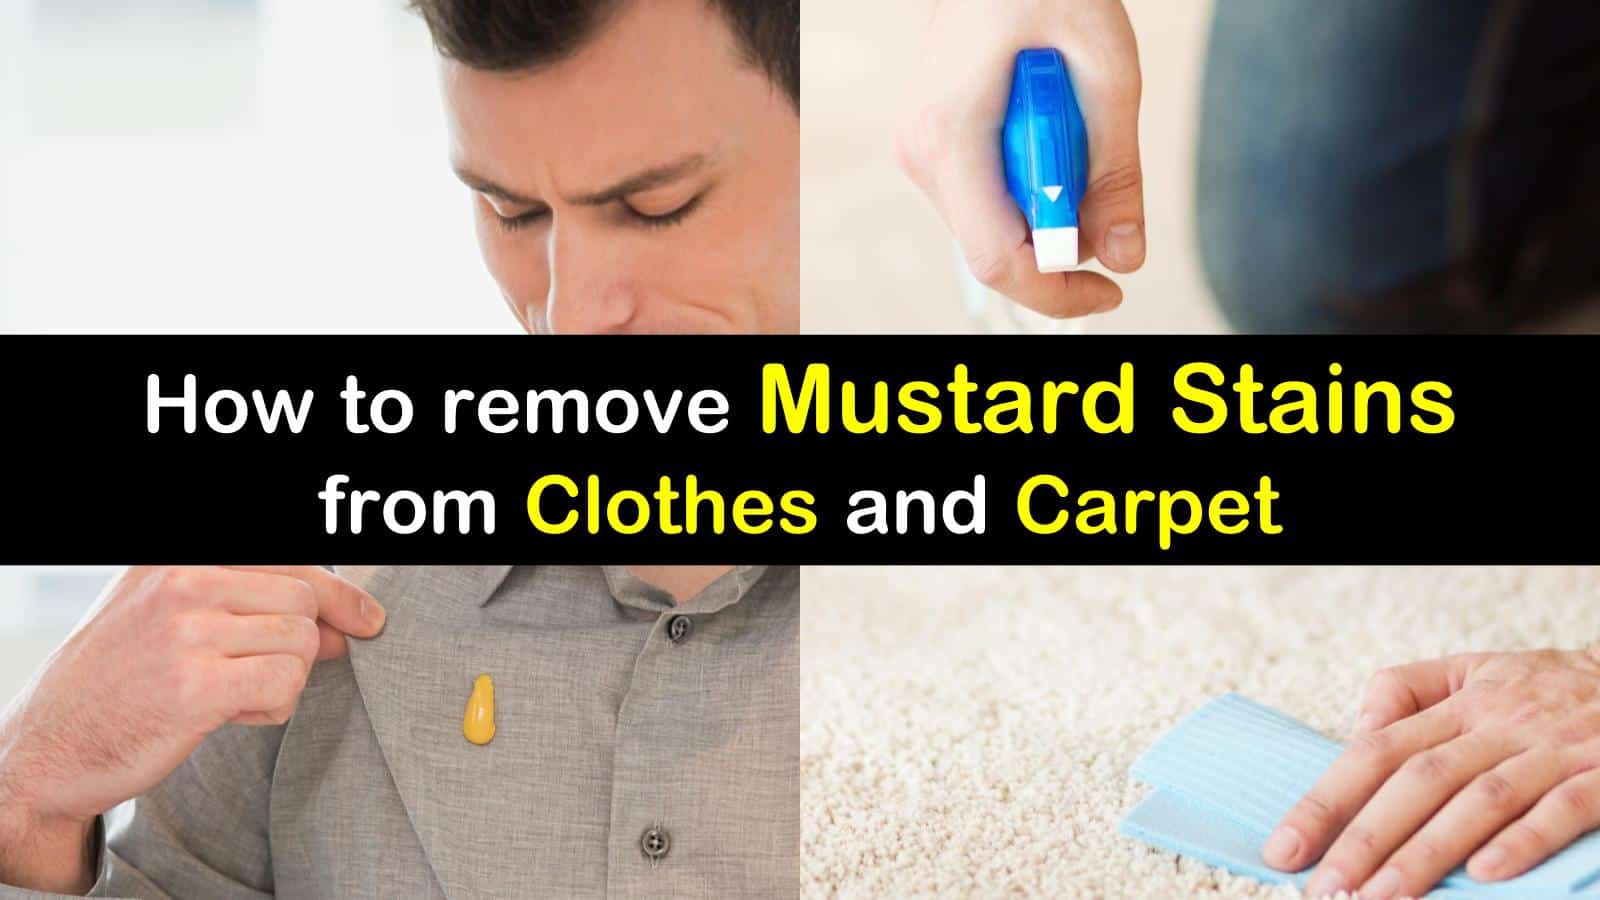 how to remove mustard stains titlimg1